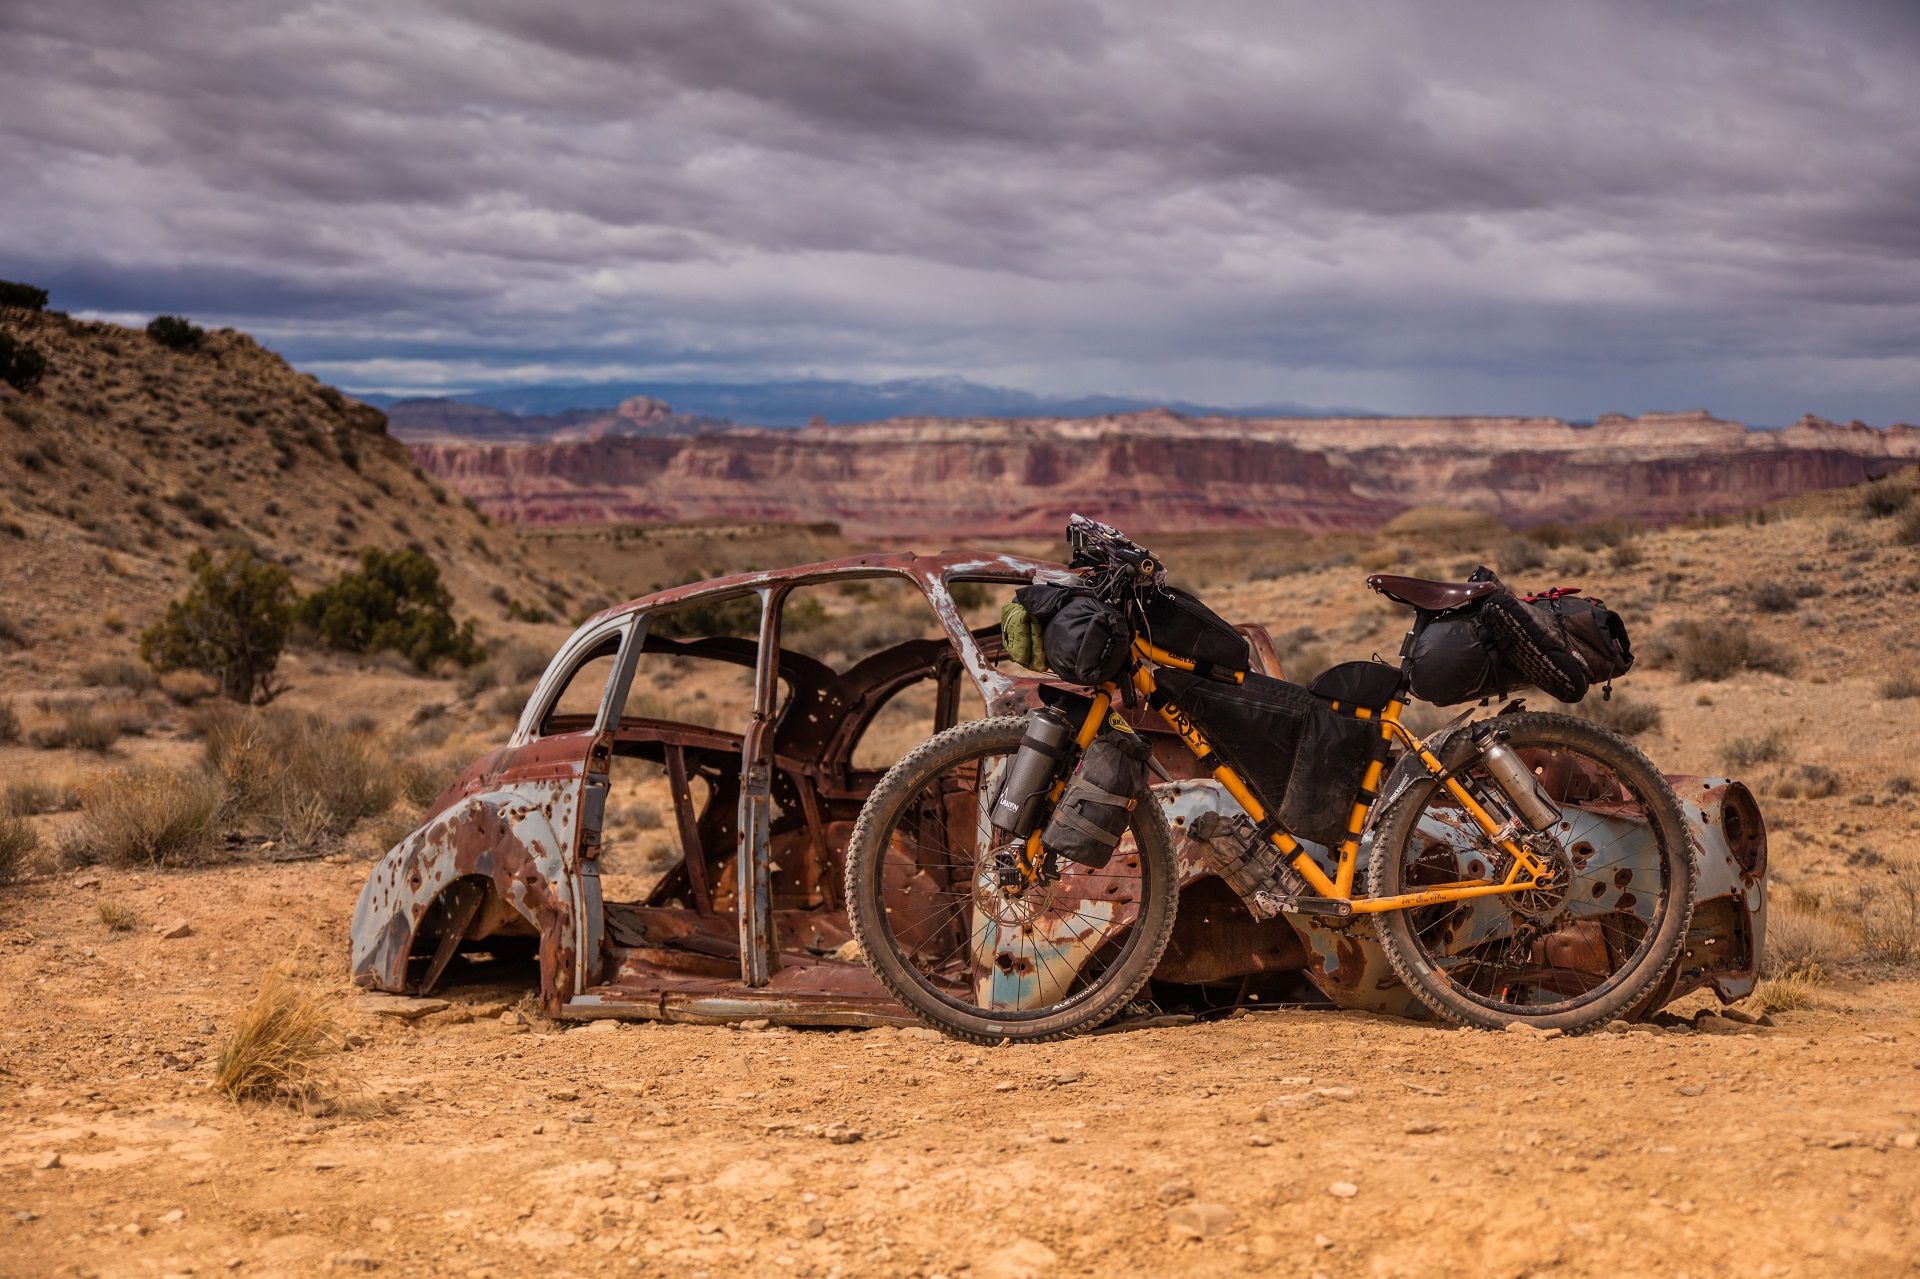 Choosing the right bike for touring